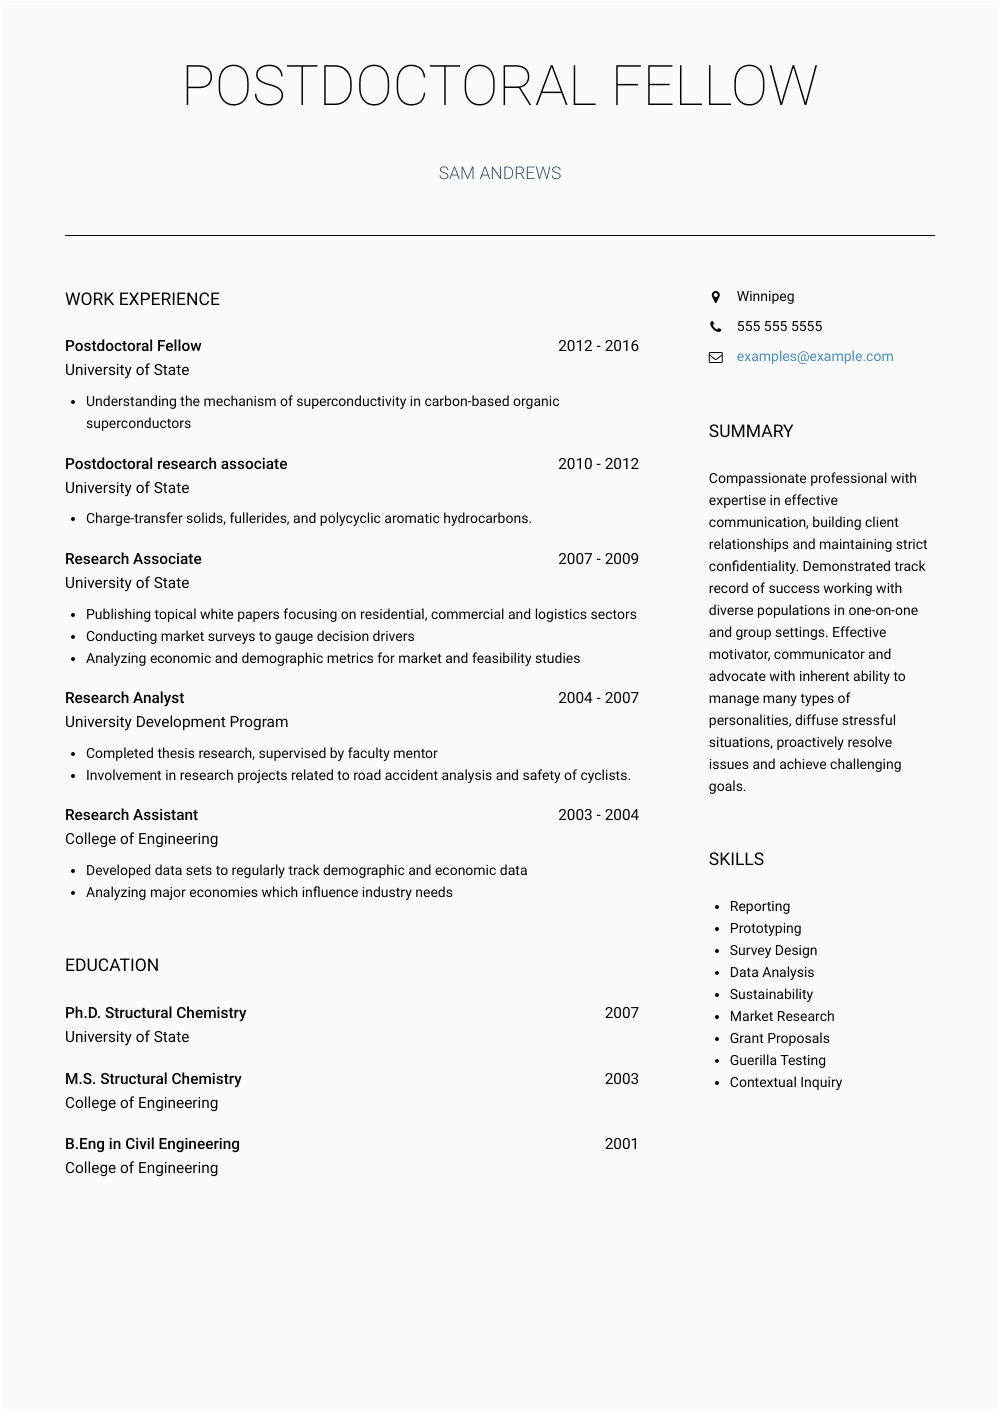 Alexaa and Dtaflow Voice Application Sample Resume Postdoctoral Fellow Resume Samples and Templates